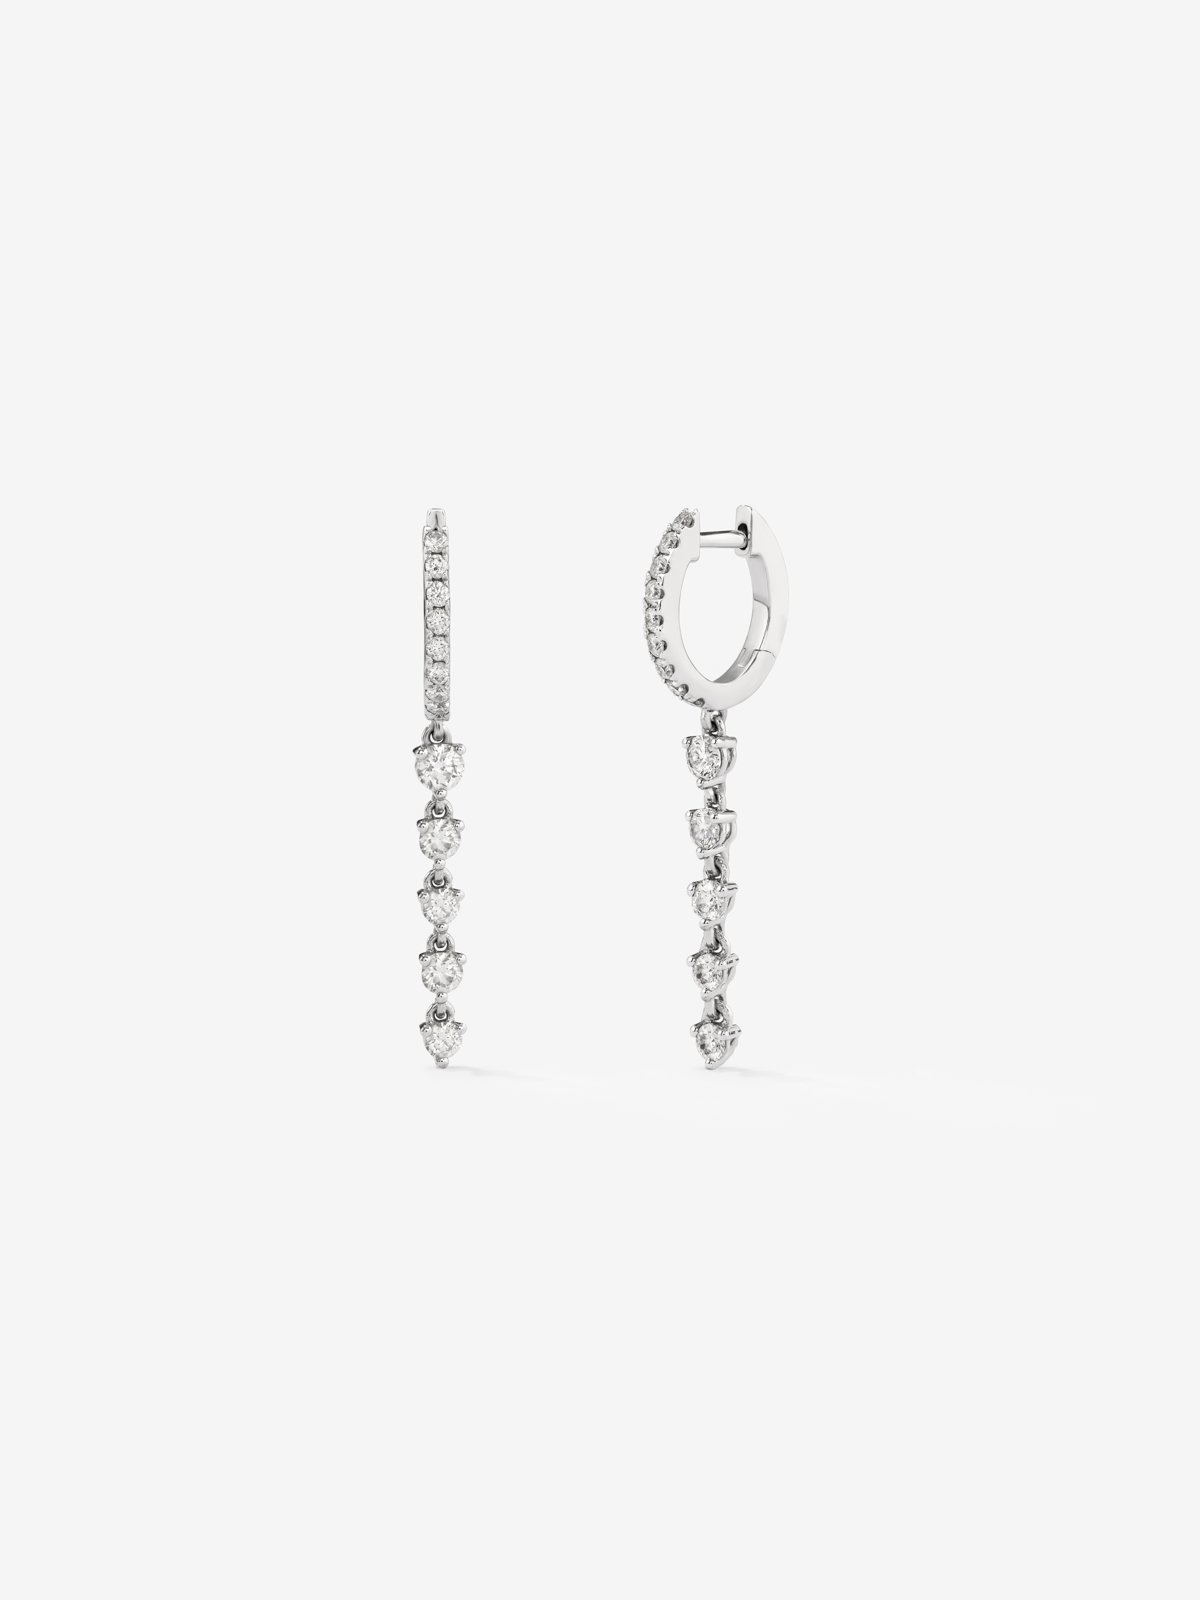 Long hoop earrings made of 18K white gold with diamonds.